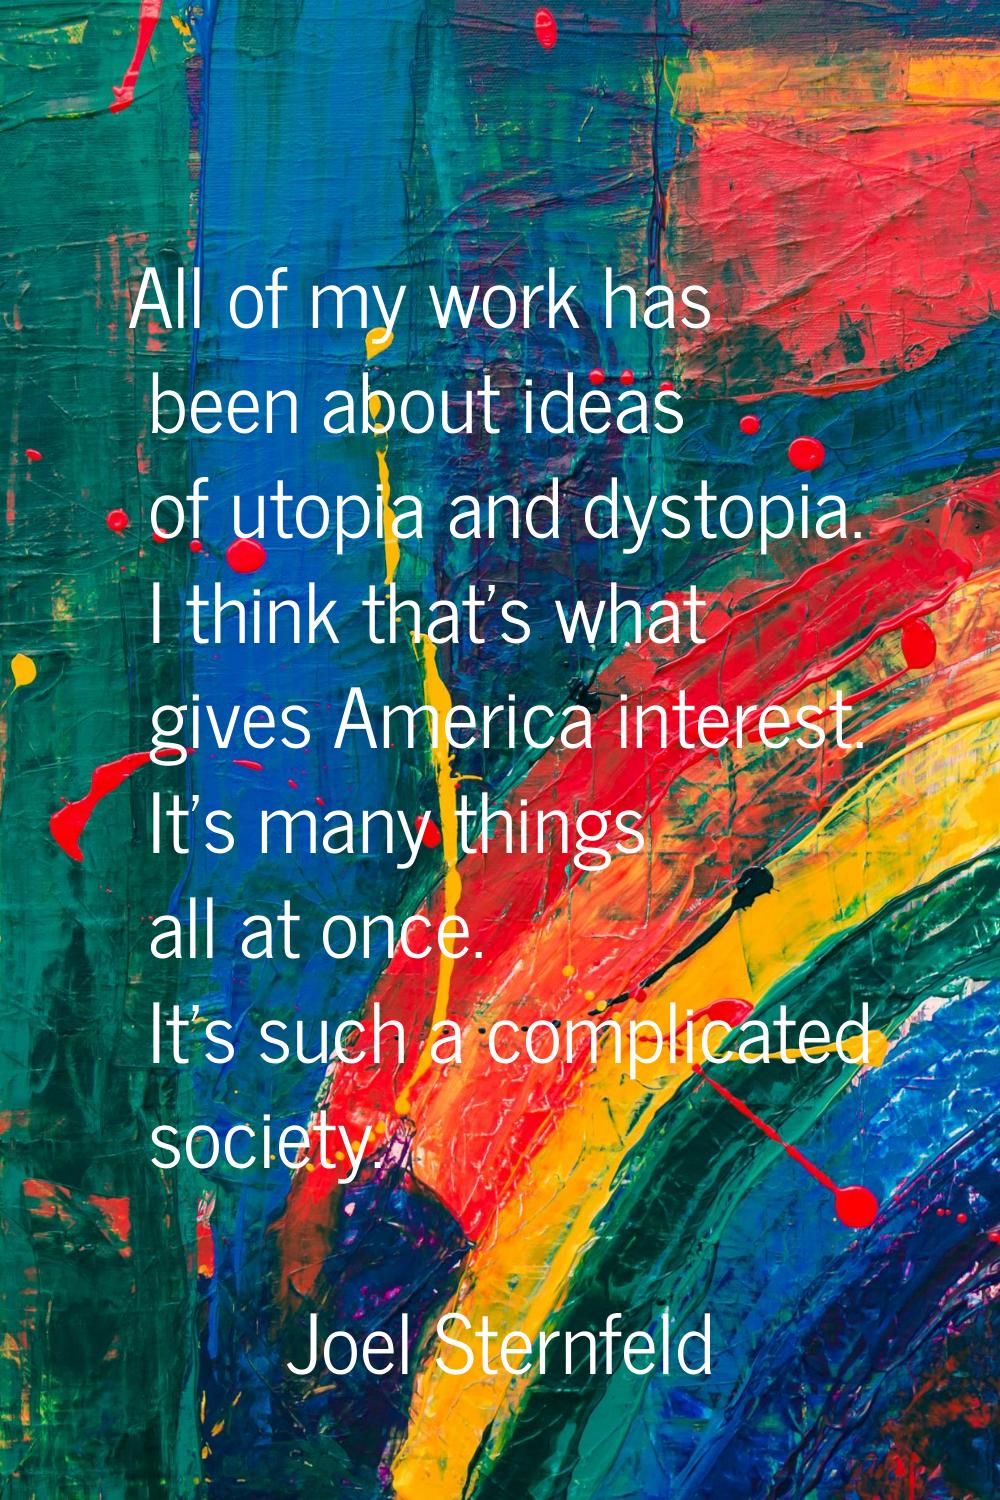 All of my work has been about ideas of utopia and dystopia. I think that's what gives America inter